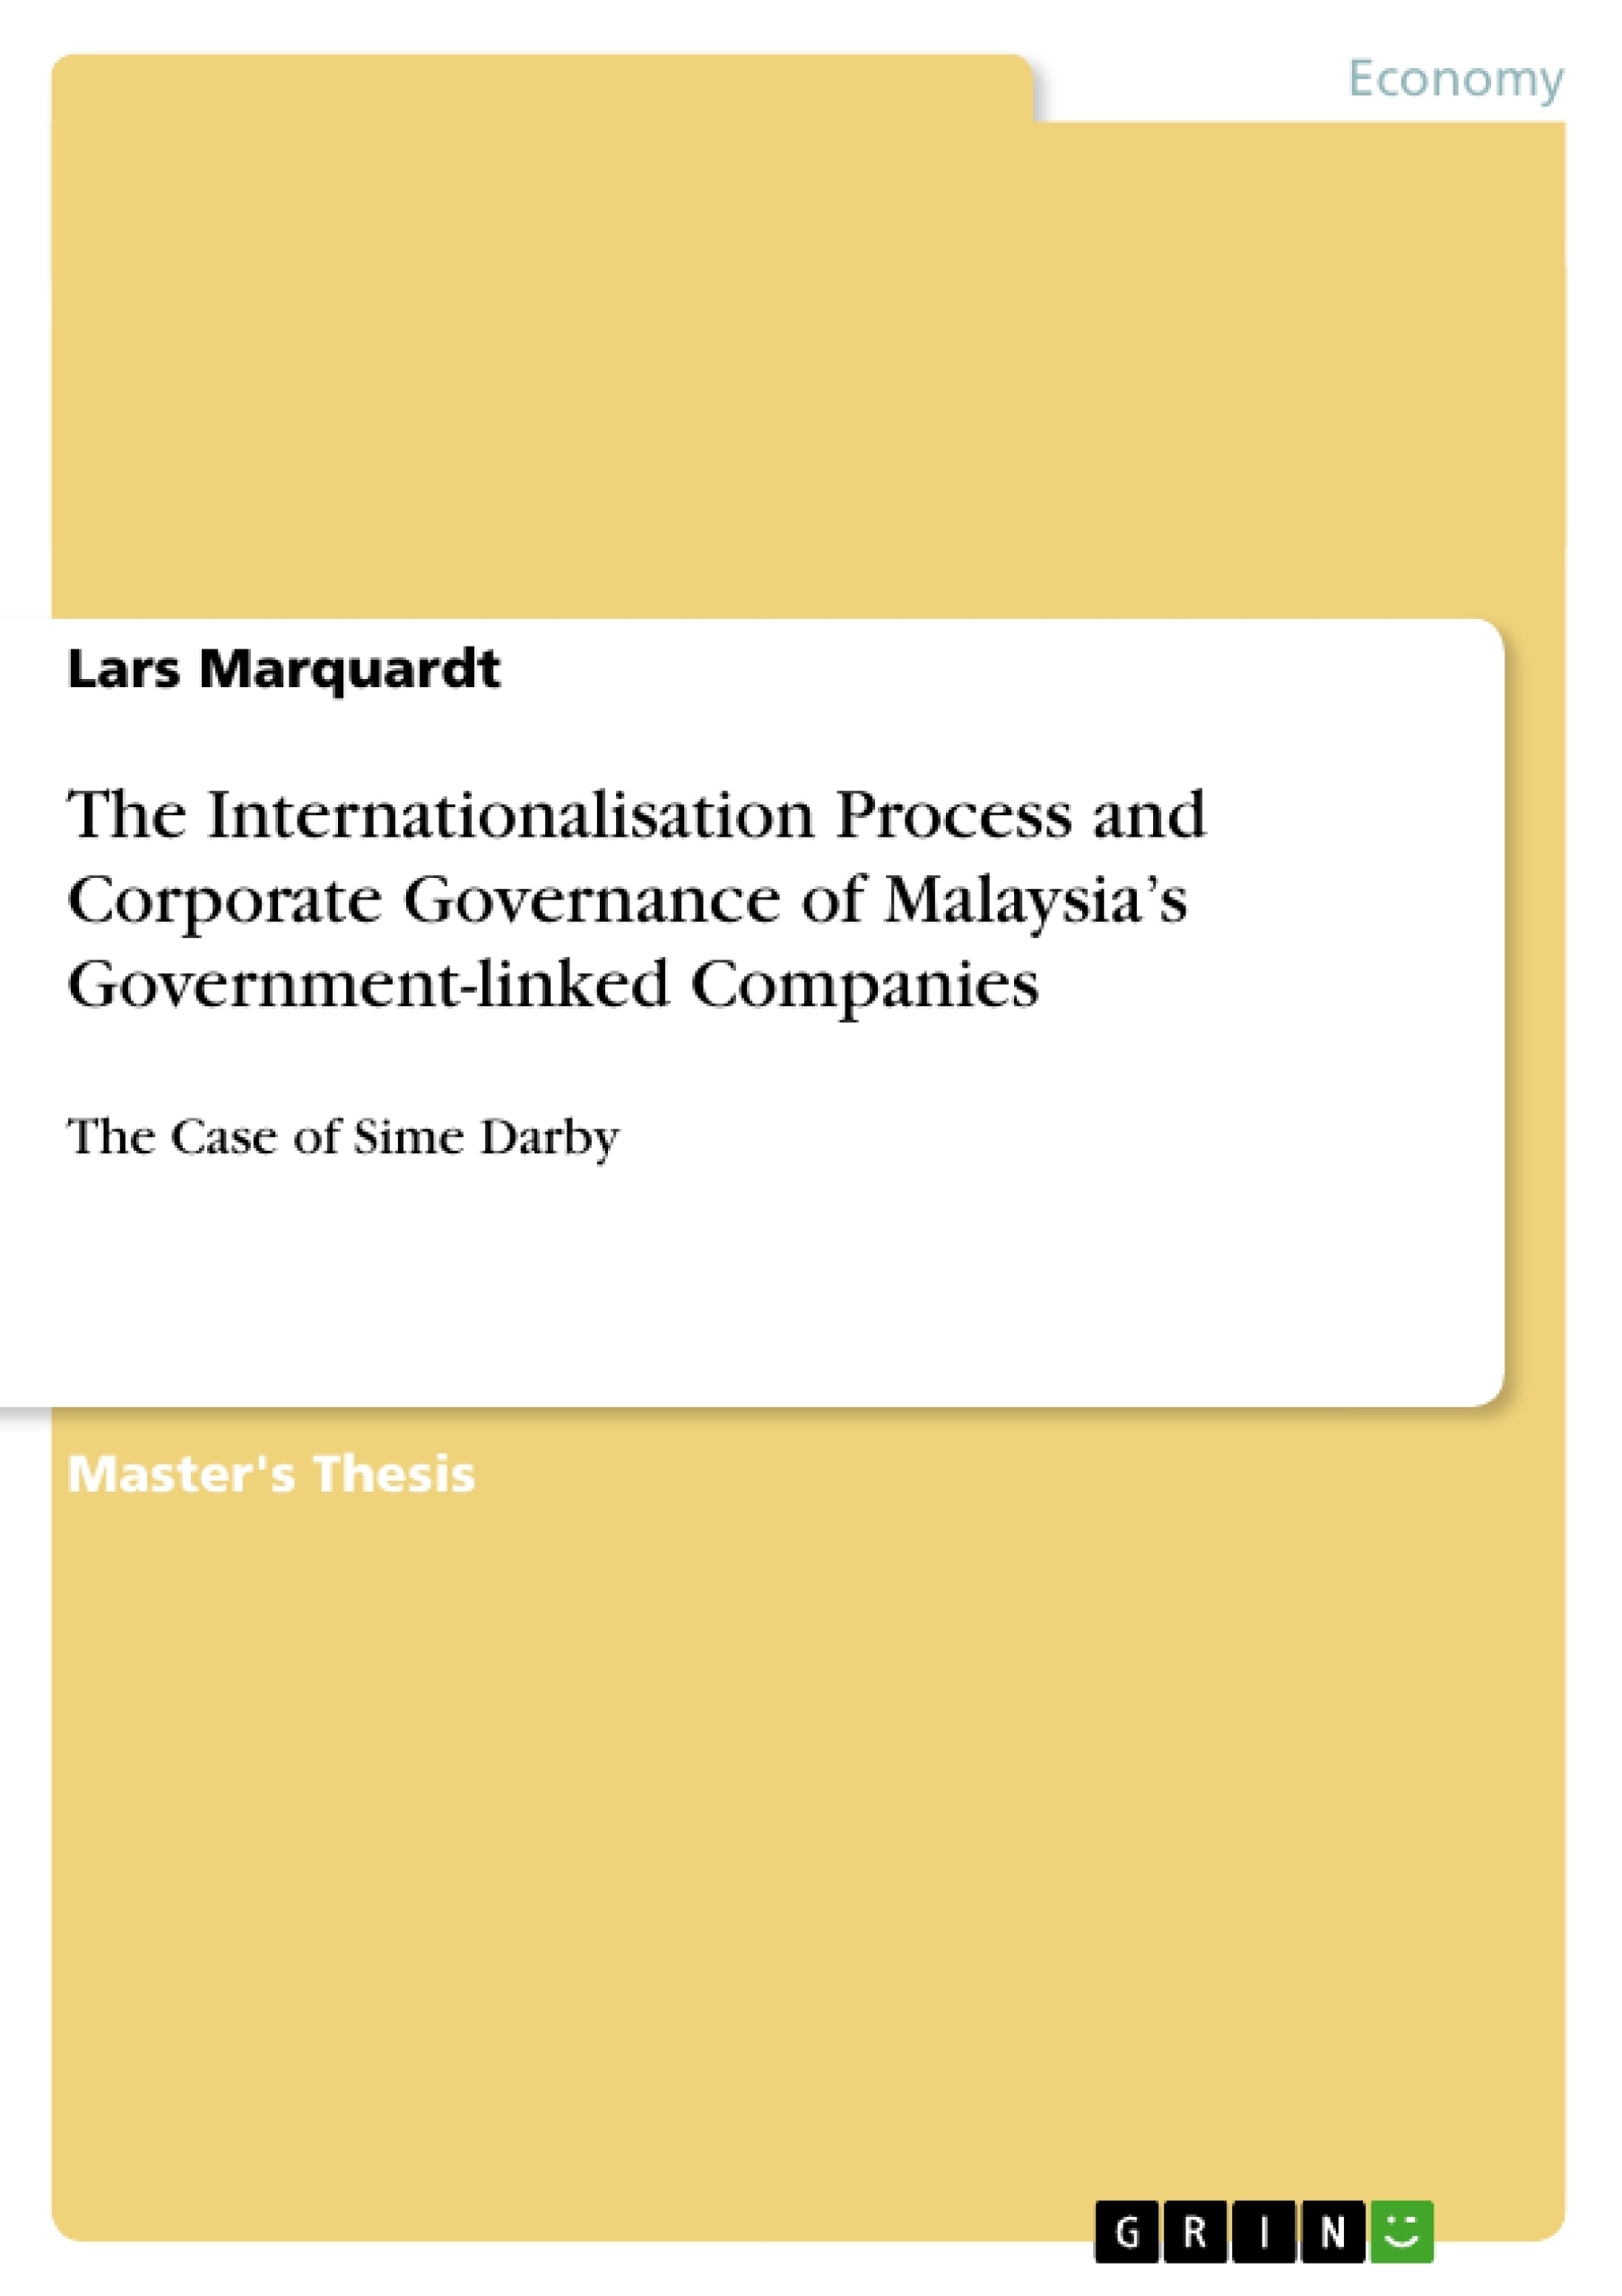 Titel: The Internationalisation Process and Corporate Governance of Malaysia’s Government-linked Companies